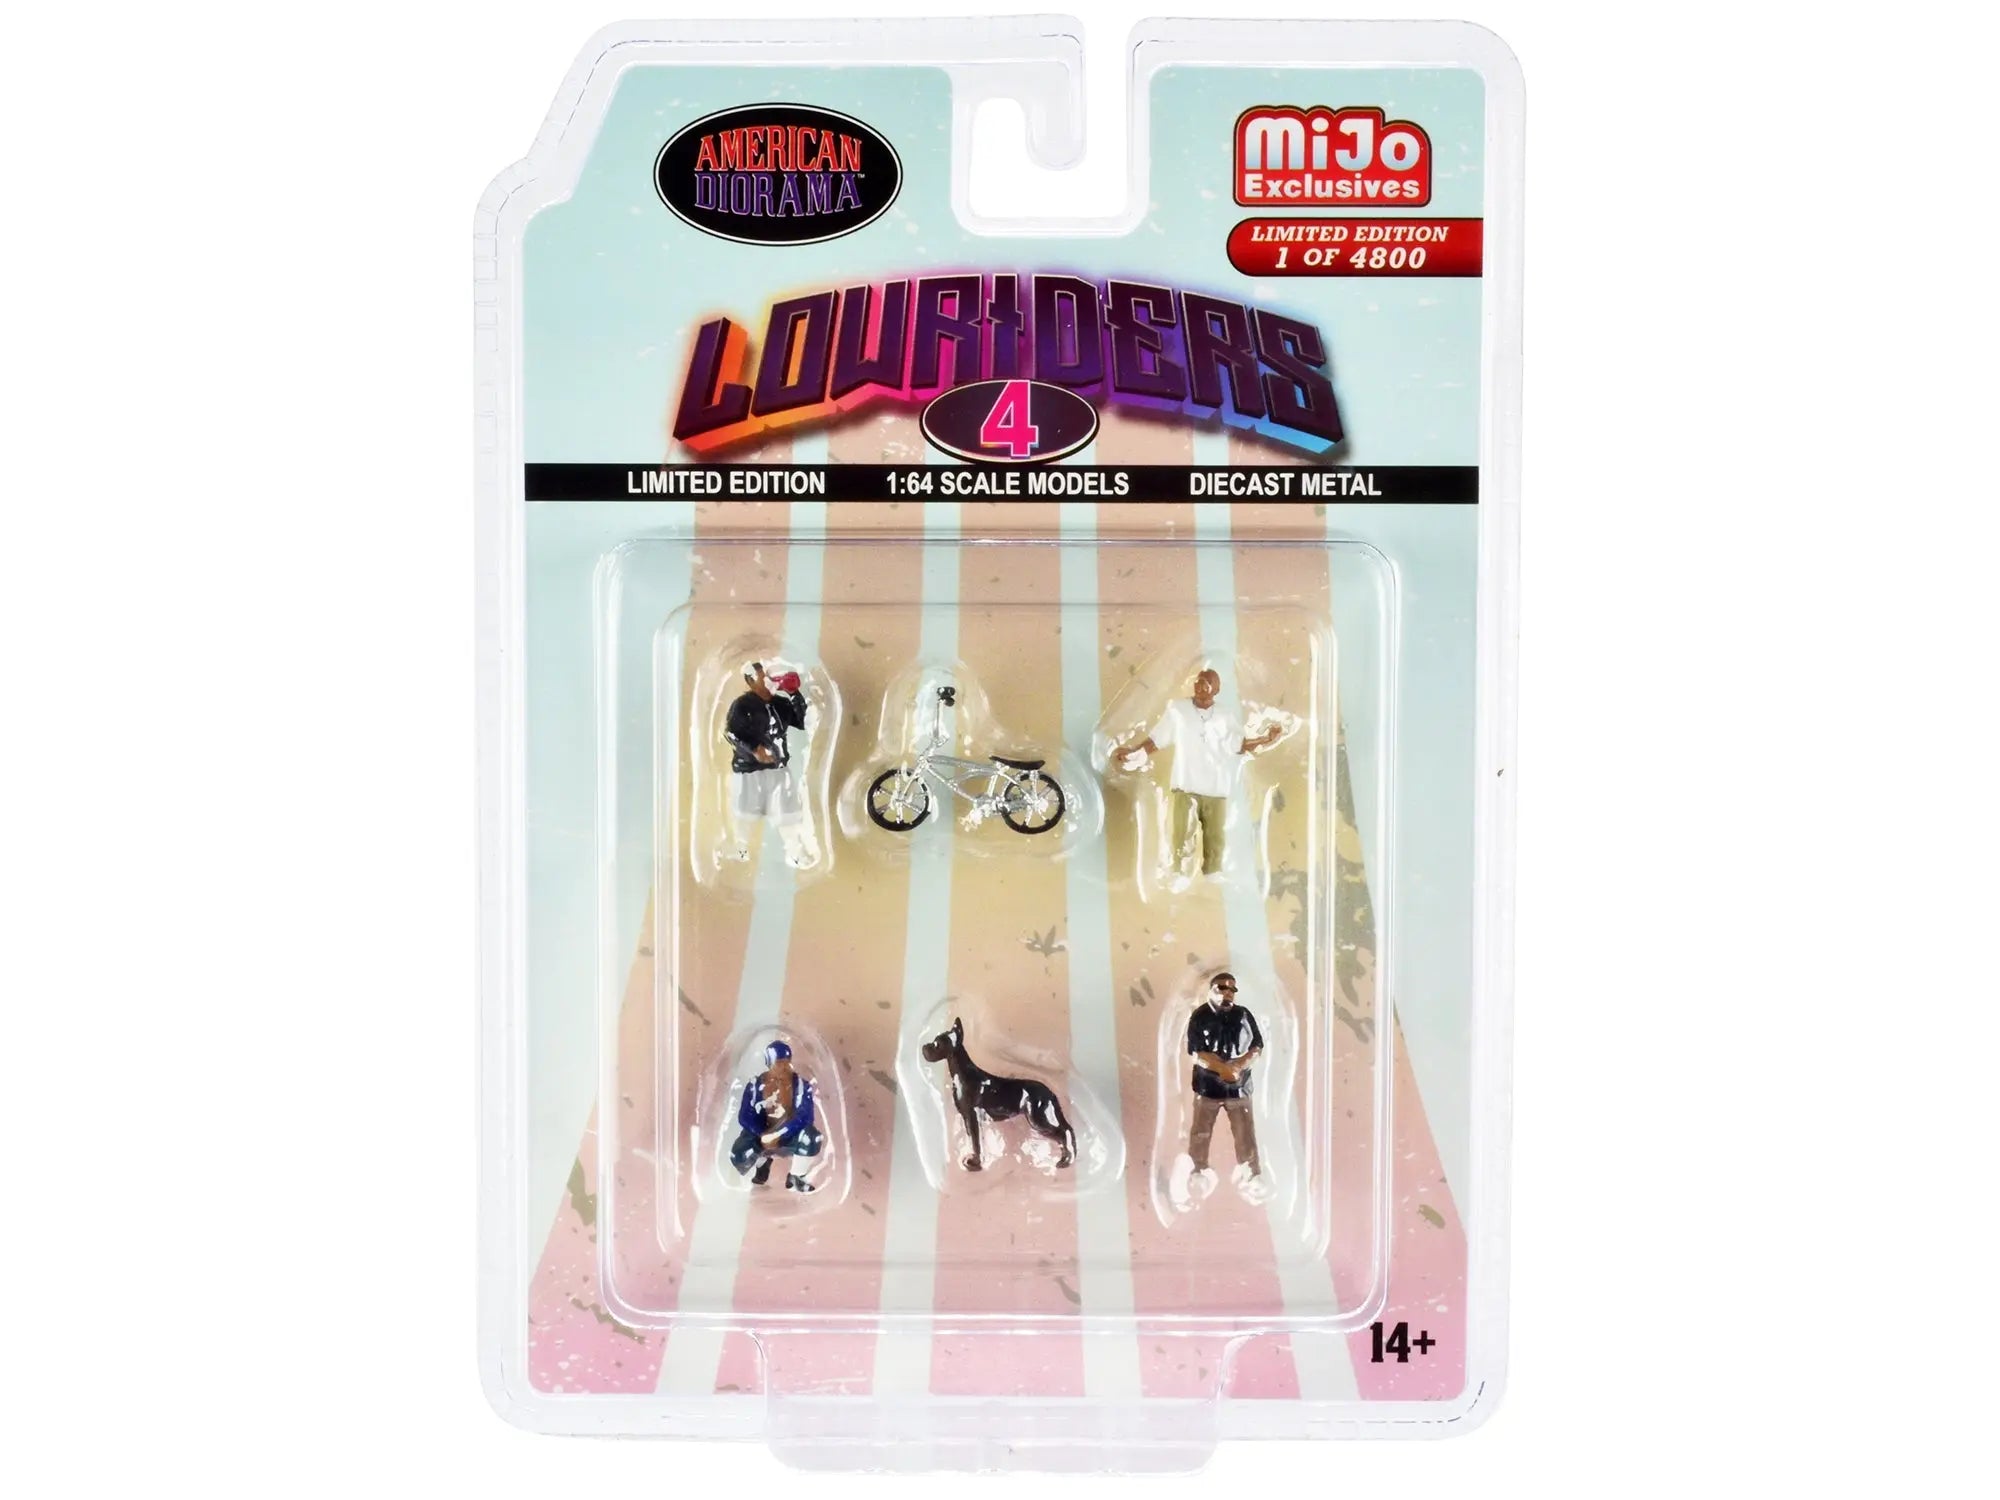 "Lowriders 4" 6 piece Diecast Set (4 Men 1 Dog 1 Bicycle Figures and Accessories) Limited Edition to 4800 pieces Worldwide 1/64 Scale Models by American Diorama American Diorama